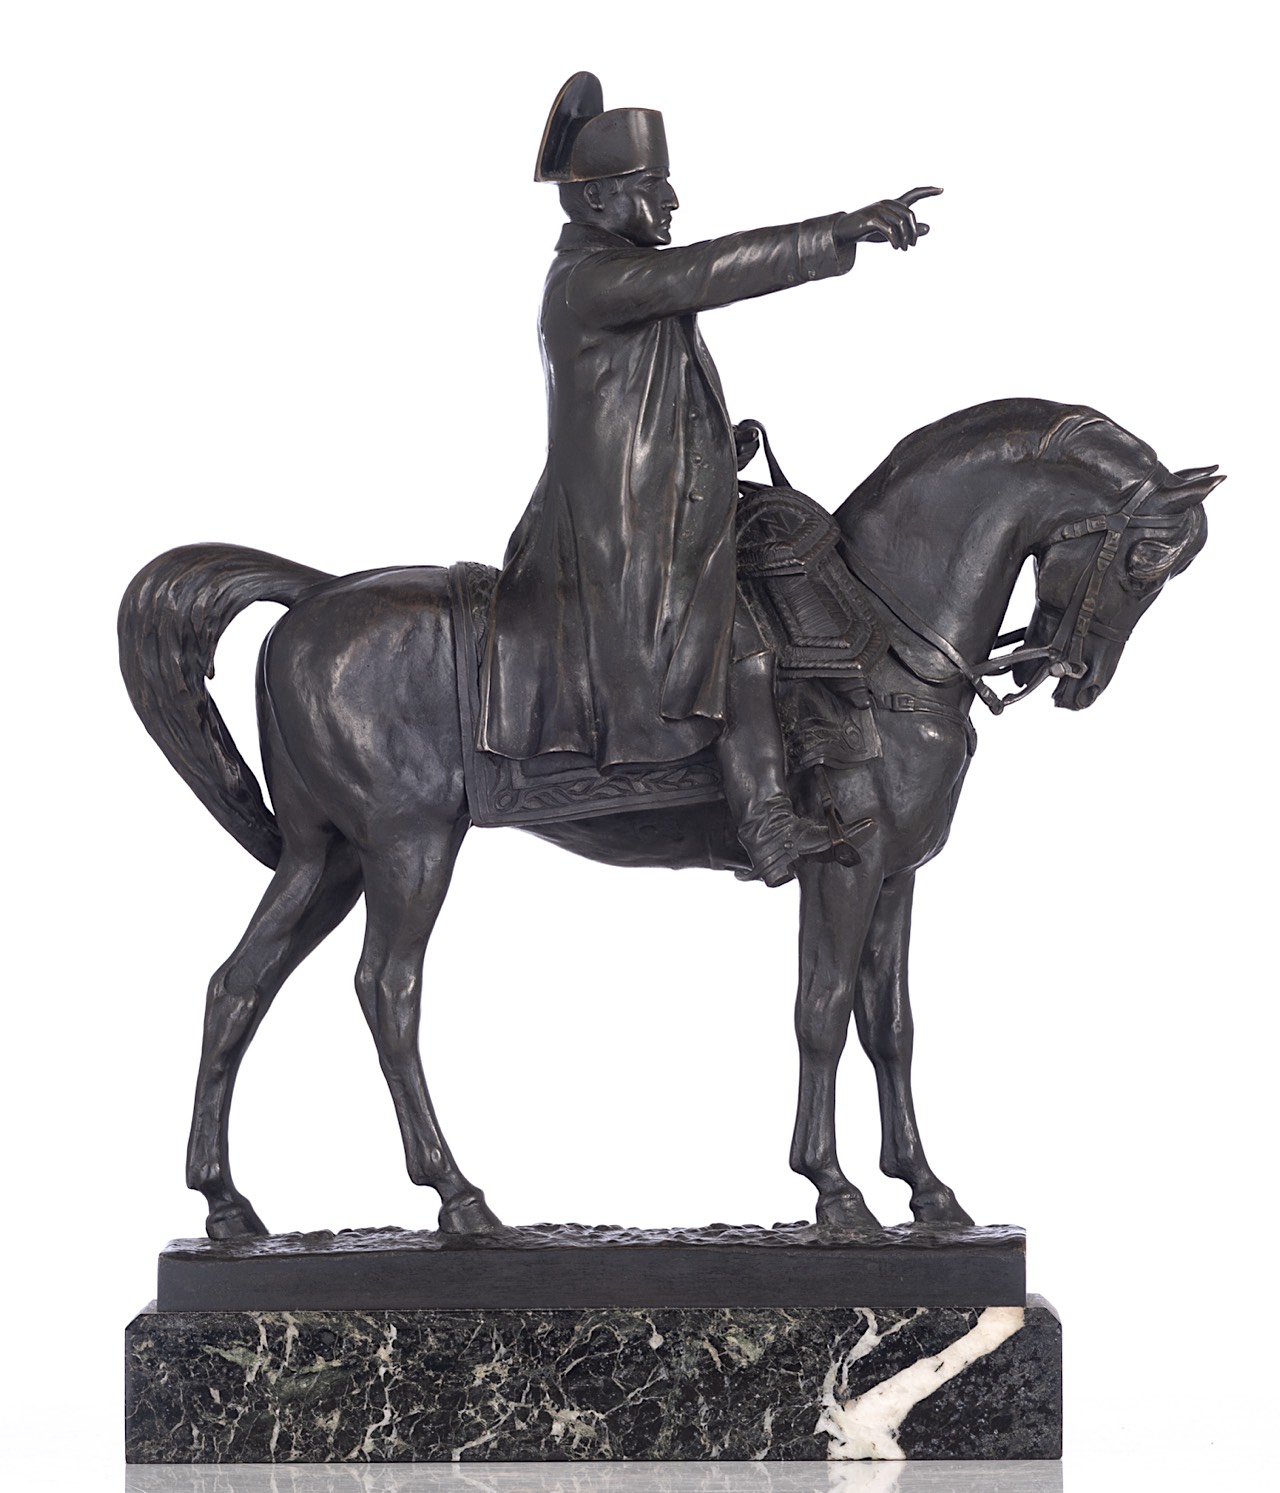 Ernest Charles Guilbert (1848-1913), Equestrian of Napoleon, 1910, patinated bronze, H 40 cm - Image 4 of 9